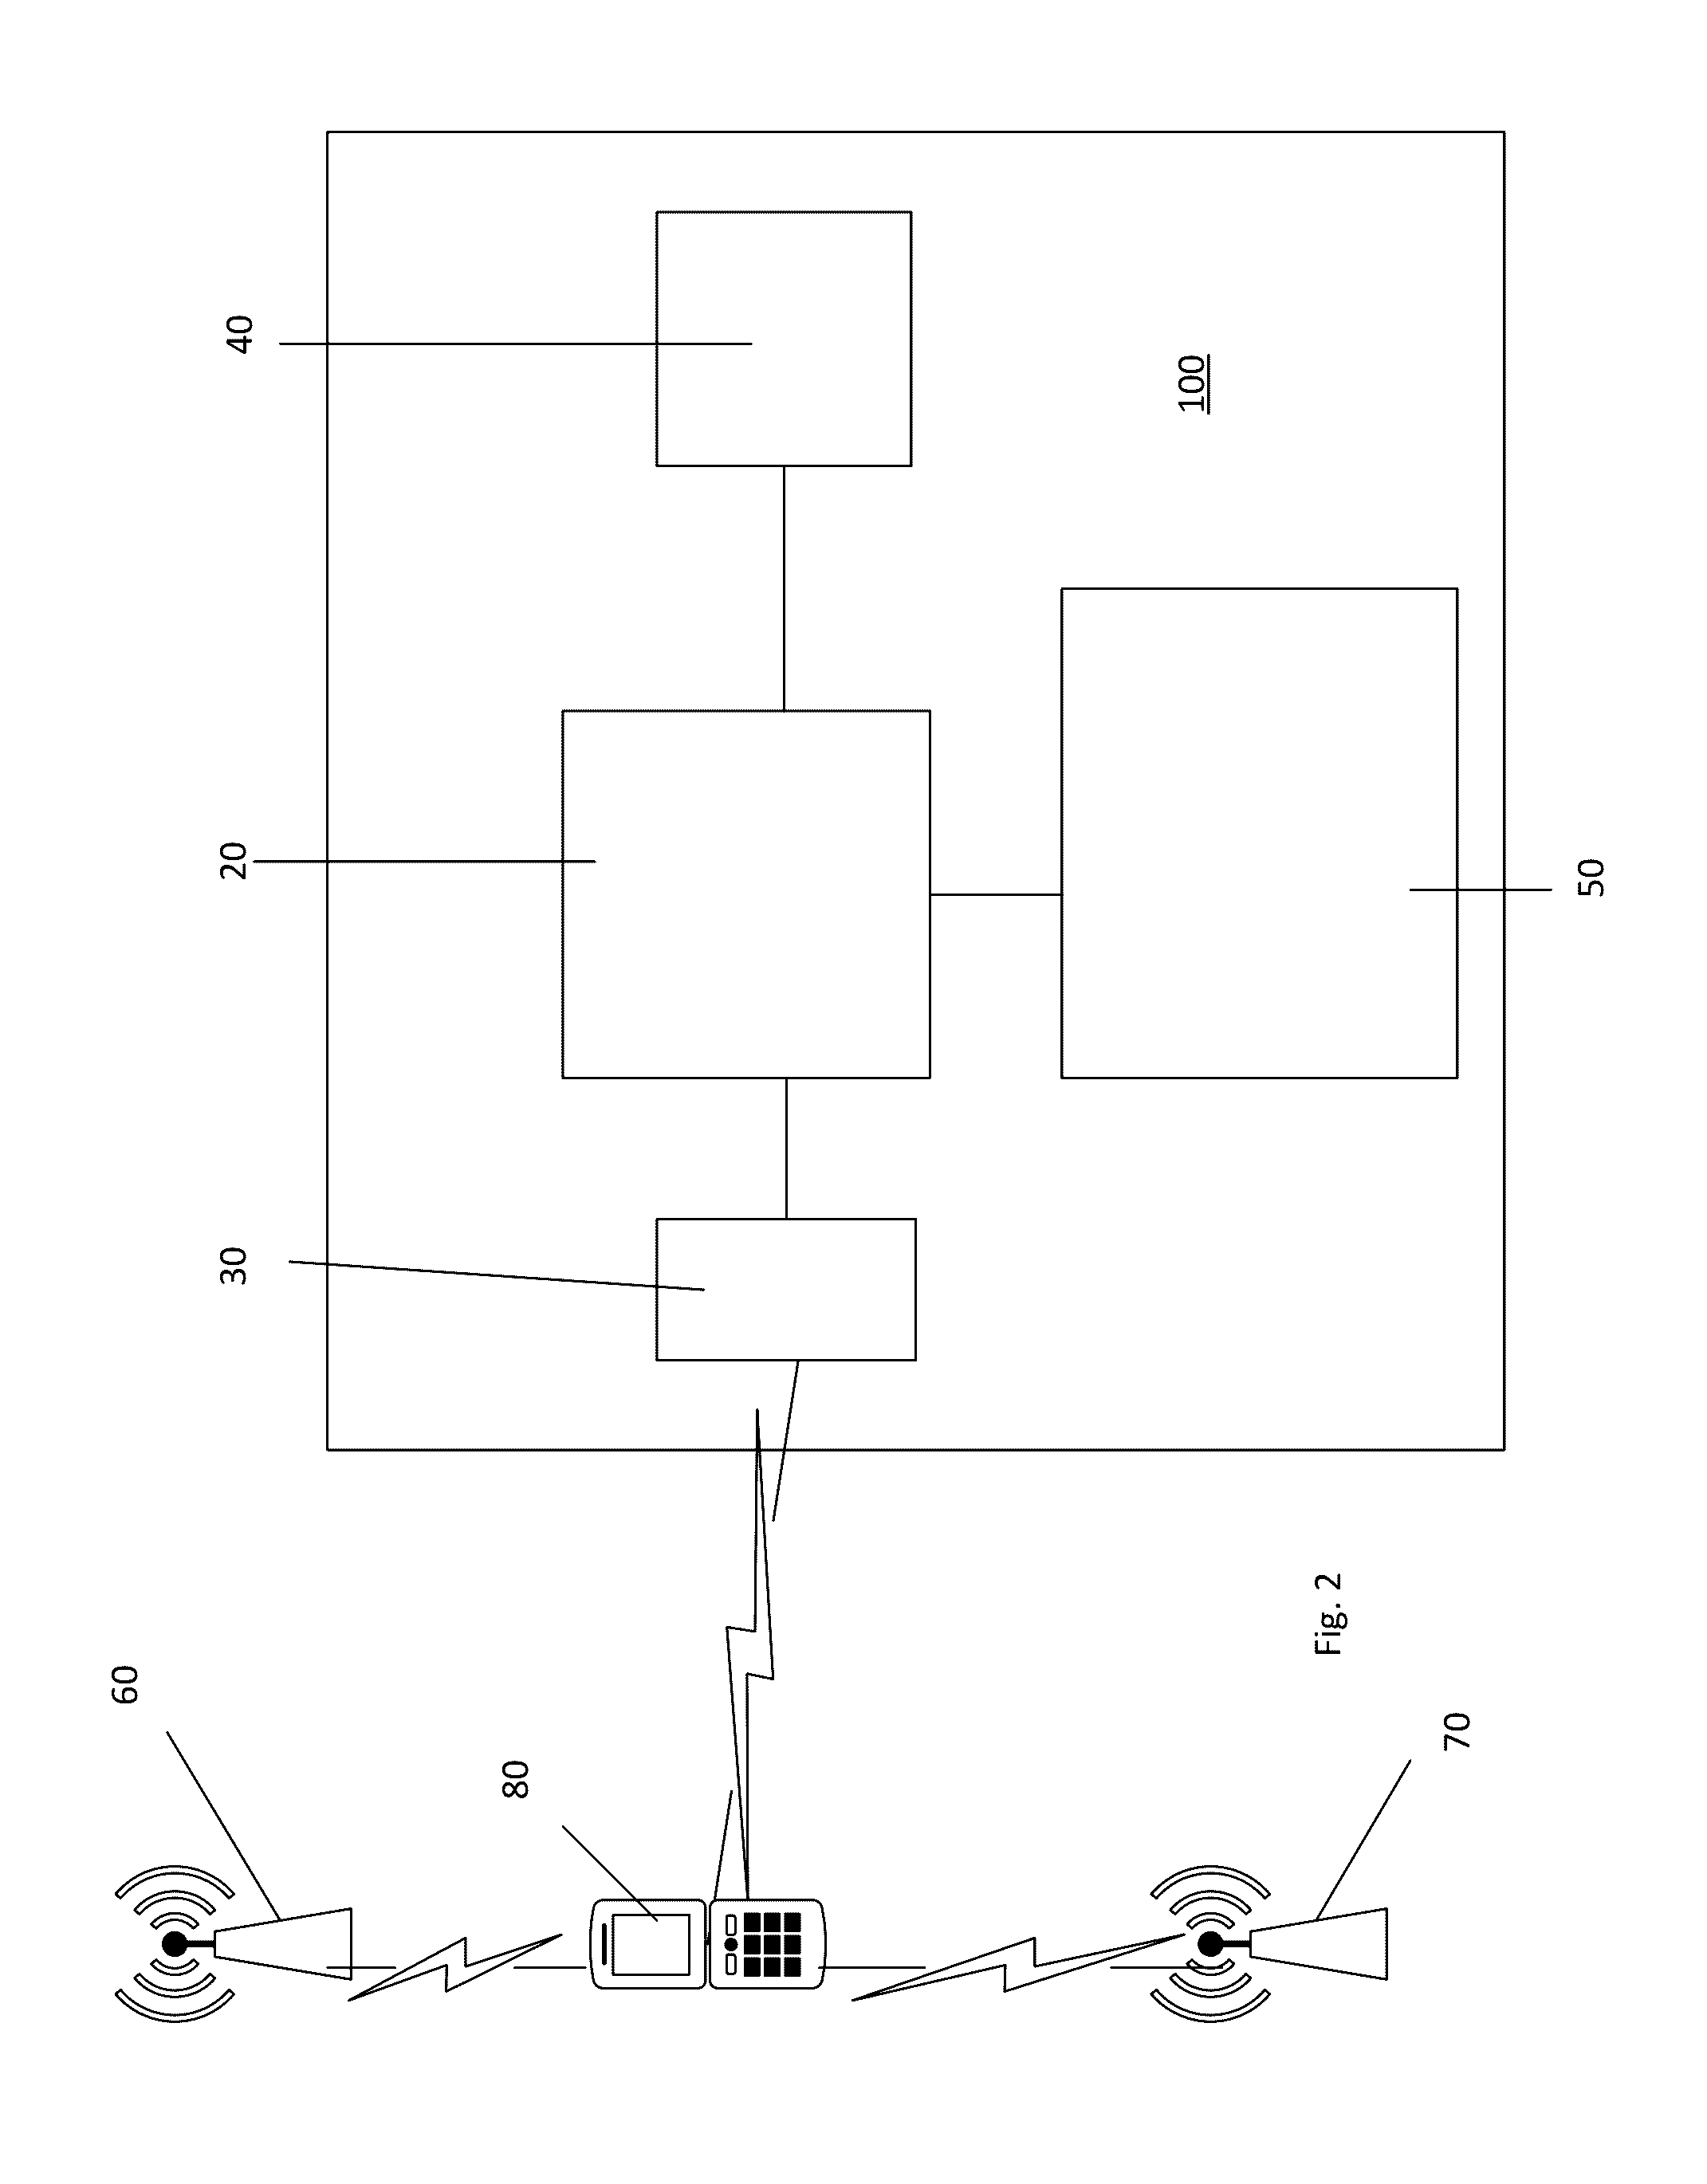 Mobile device positioning system and method